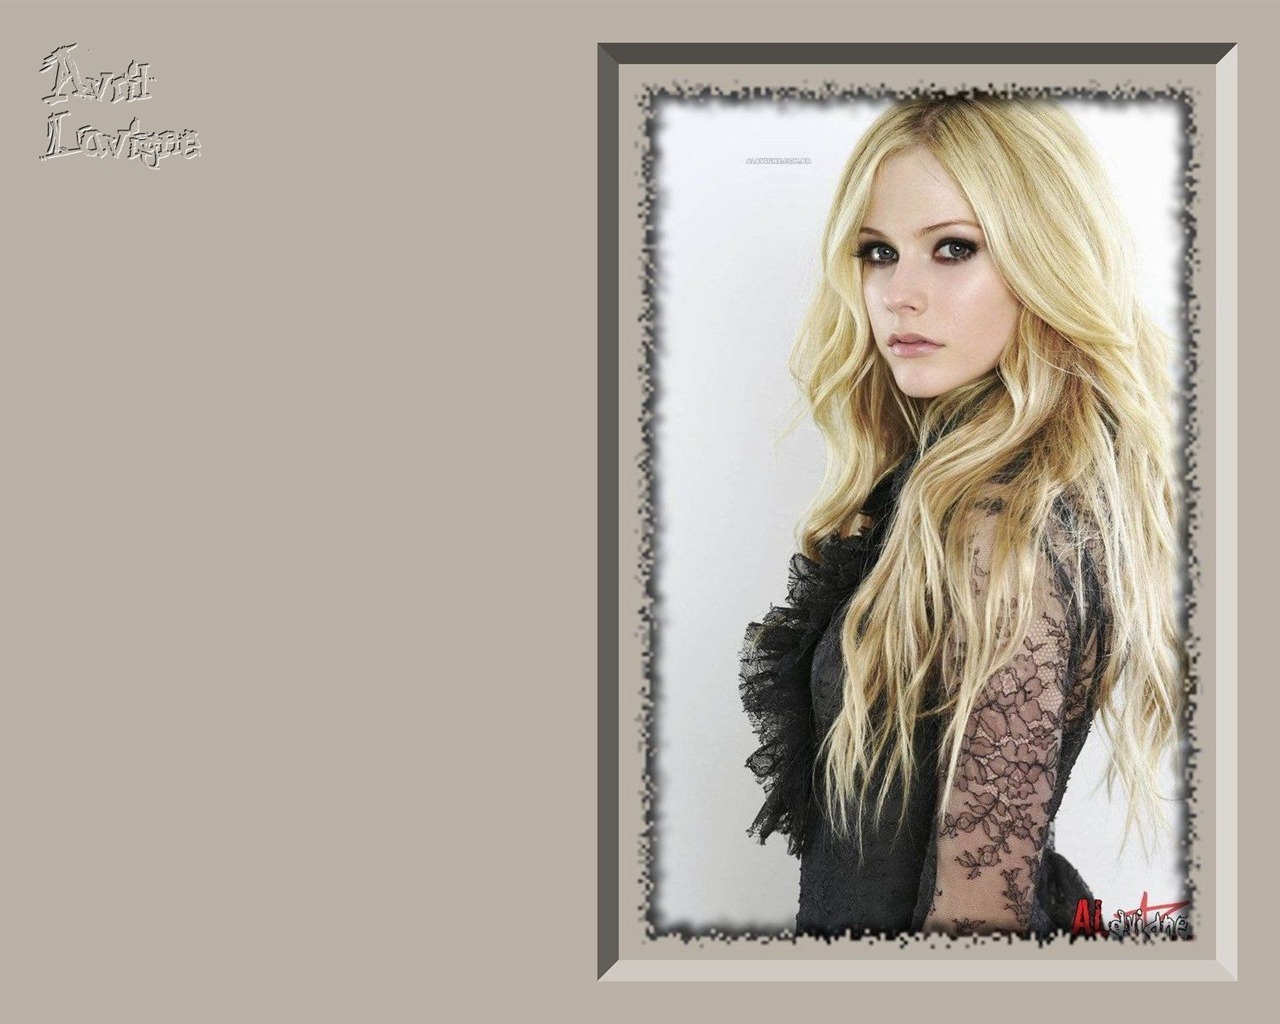 Avril Lavigne #066 - 1280x1024 Wallpapers Pictures Photos Images